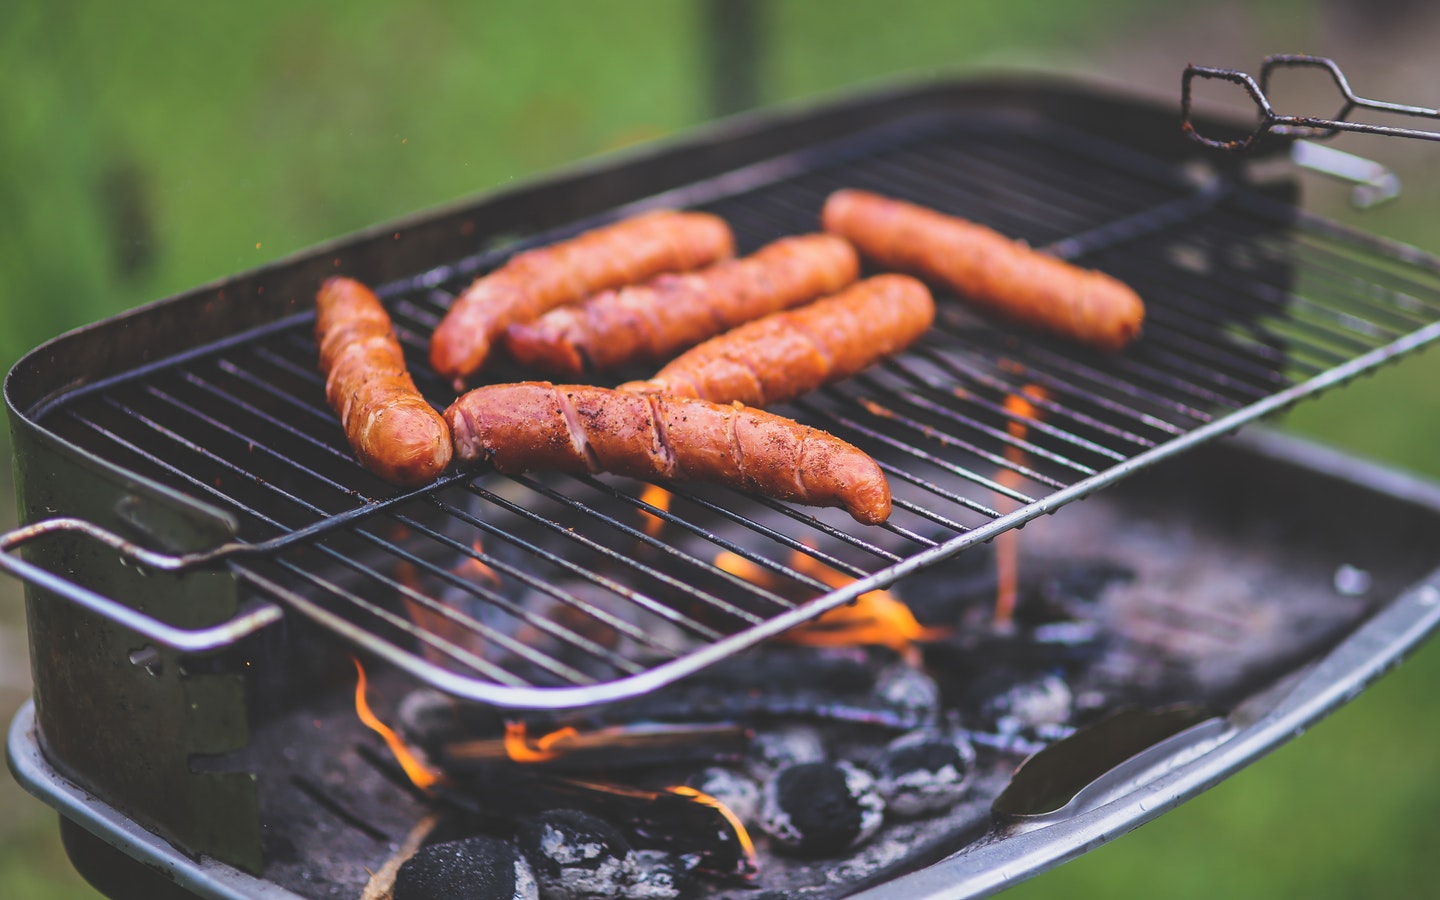 Add your preferred grilling equipments to the bbq party planning checklist before anything else